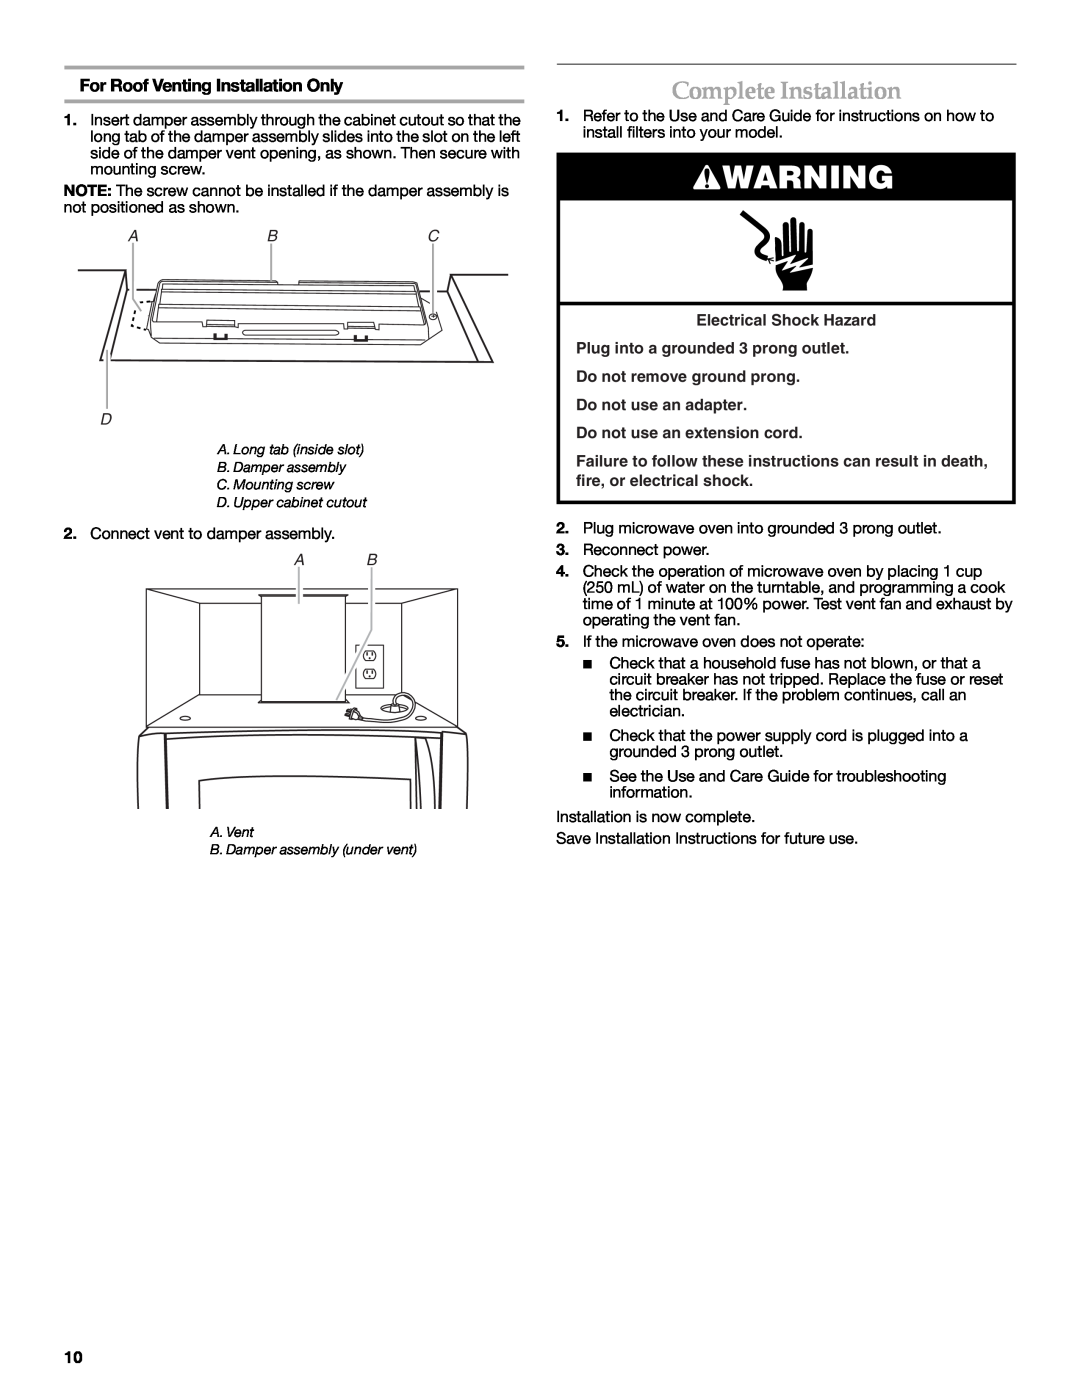 KitchenAid W10190011A Complete Installation, Abc D, For Roof Venting Installation Only, Do not use an extension cord 